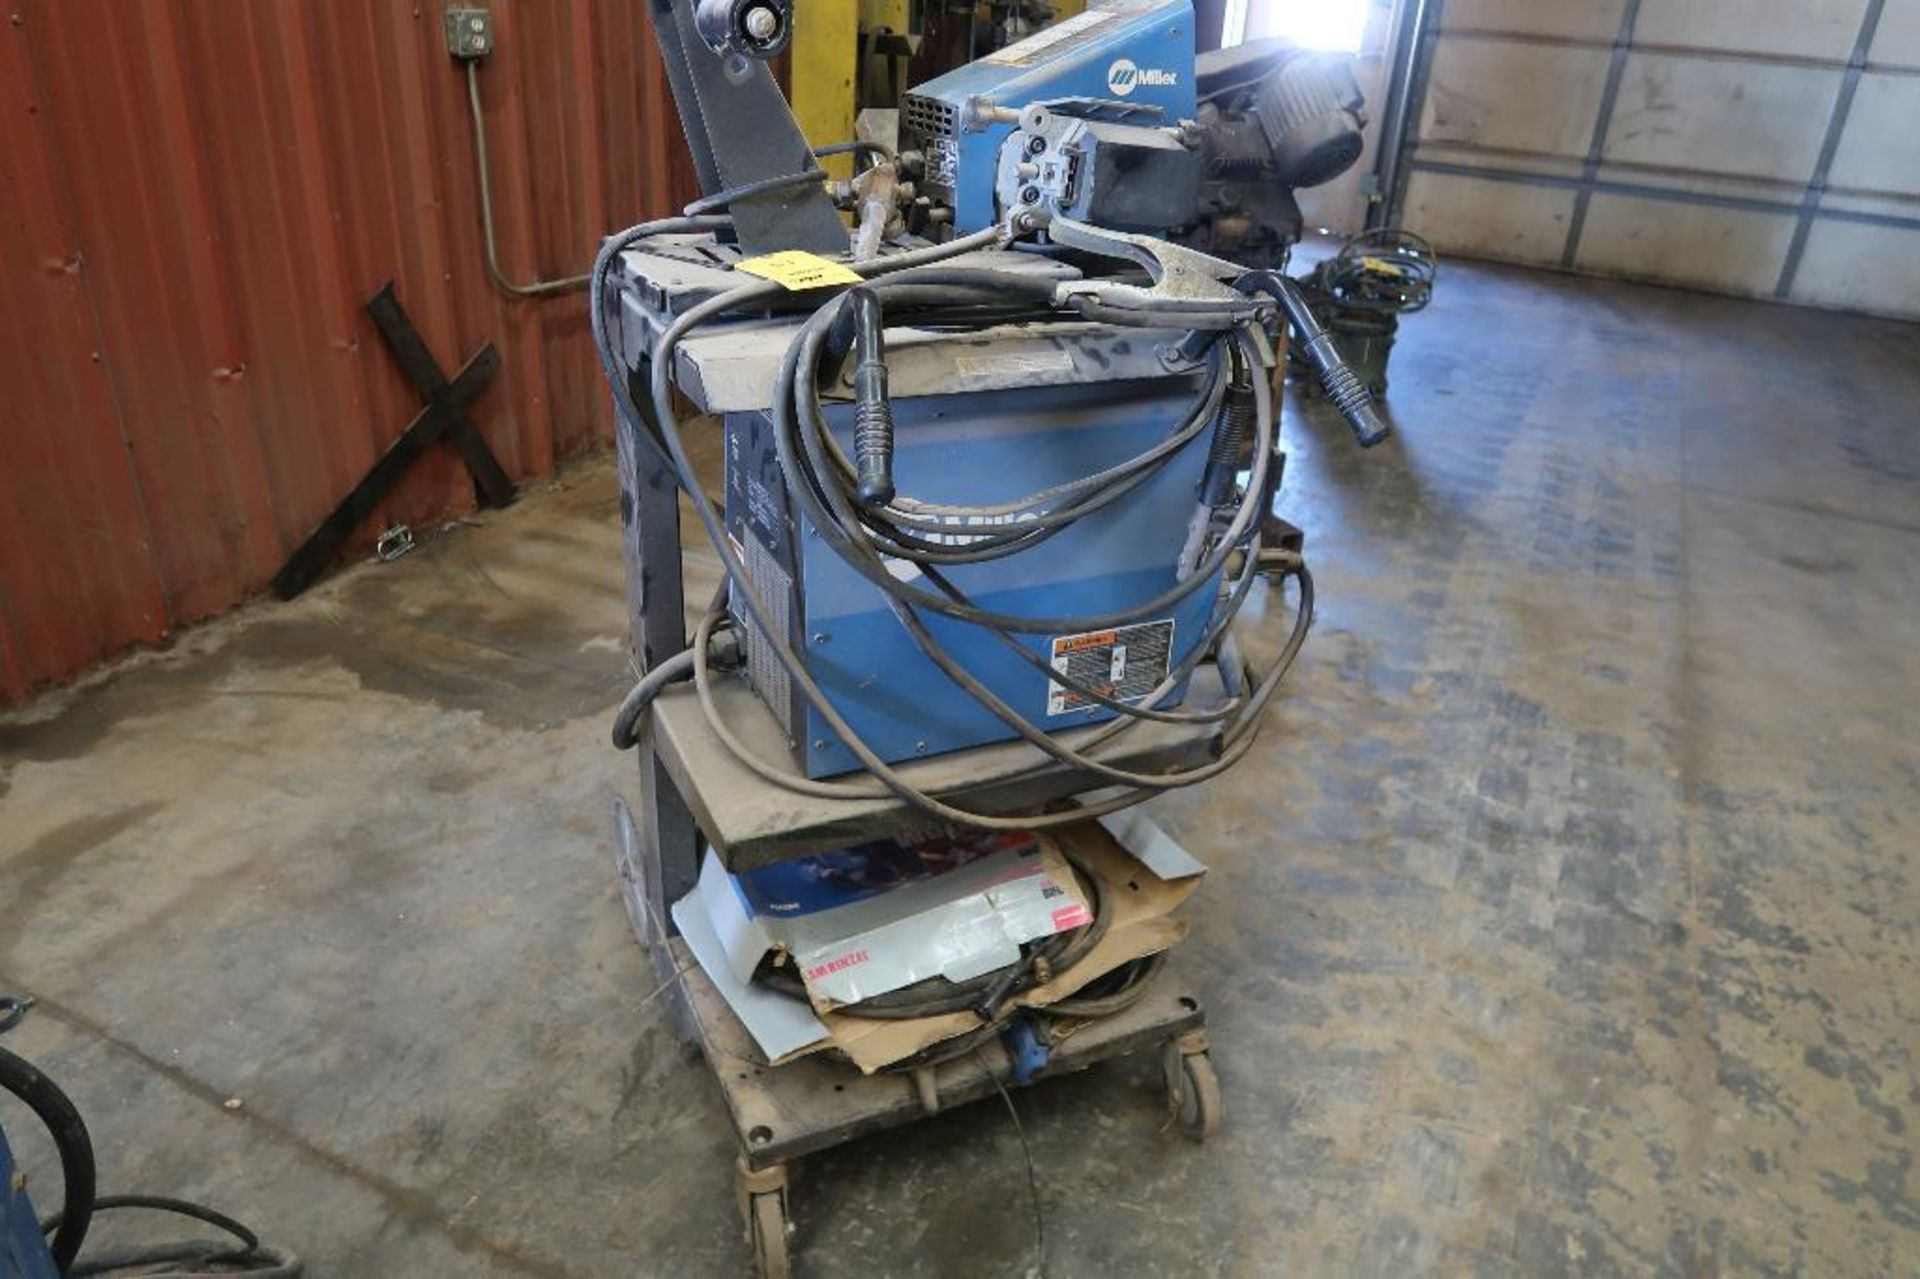 Miller CC/CV Power Supply Model XMT 350, Miller 70 Series Wire Feed on Cart, with Stinger, Gun, Grou - Image 3 of 3